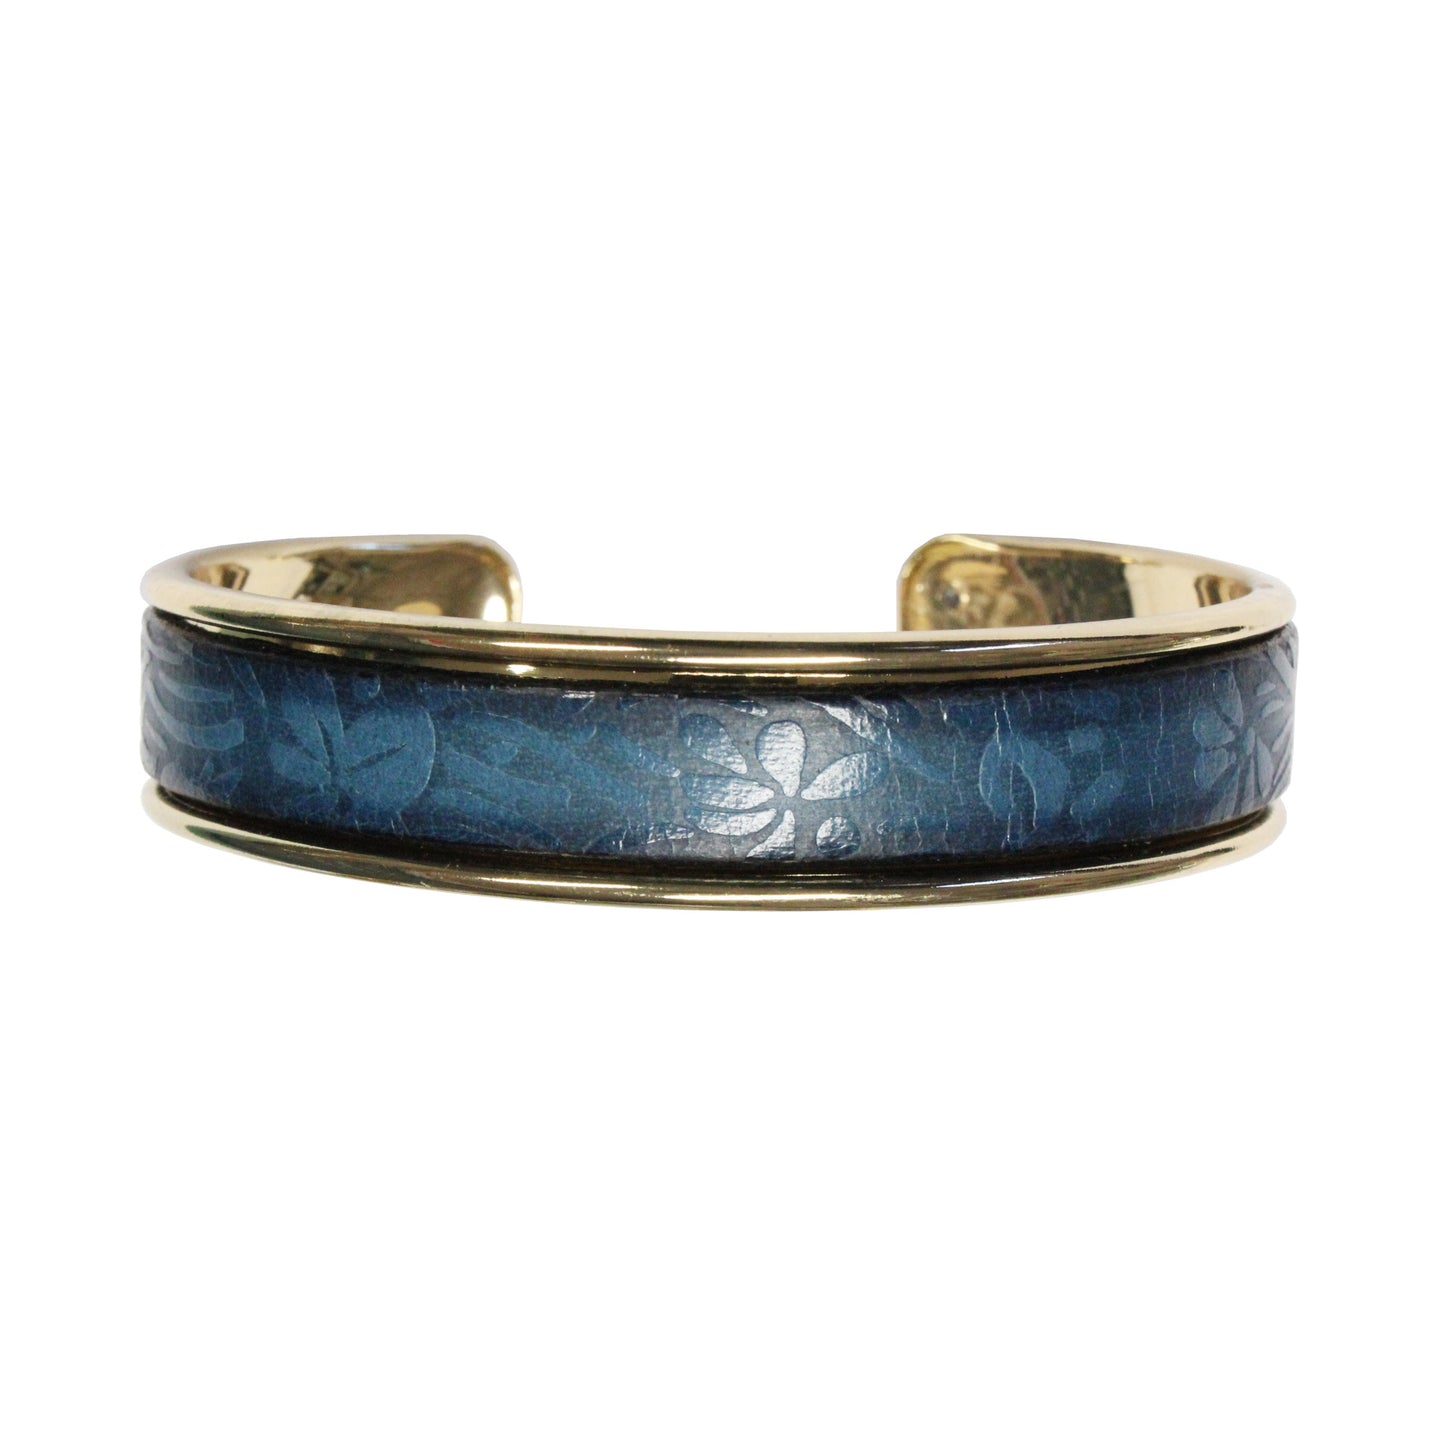 Blue Leather Cuff Bracelet / fits up to 7 inch wrist size / embossed floral leather / gold plated cuff